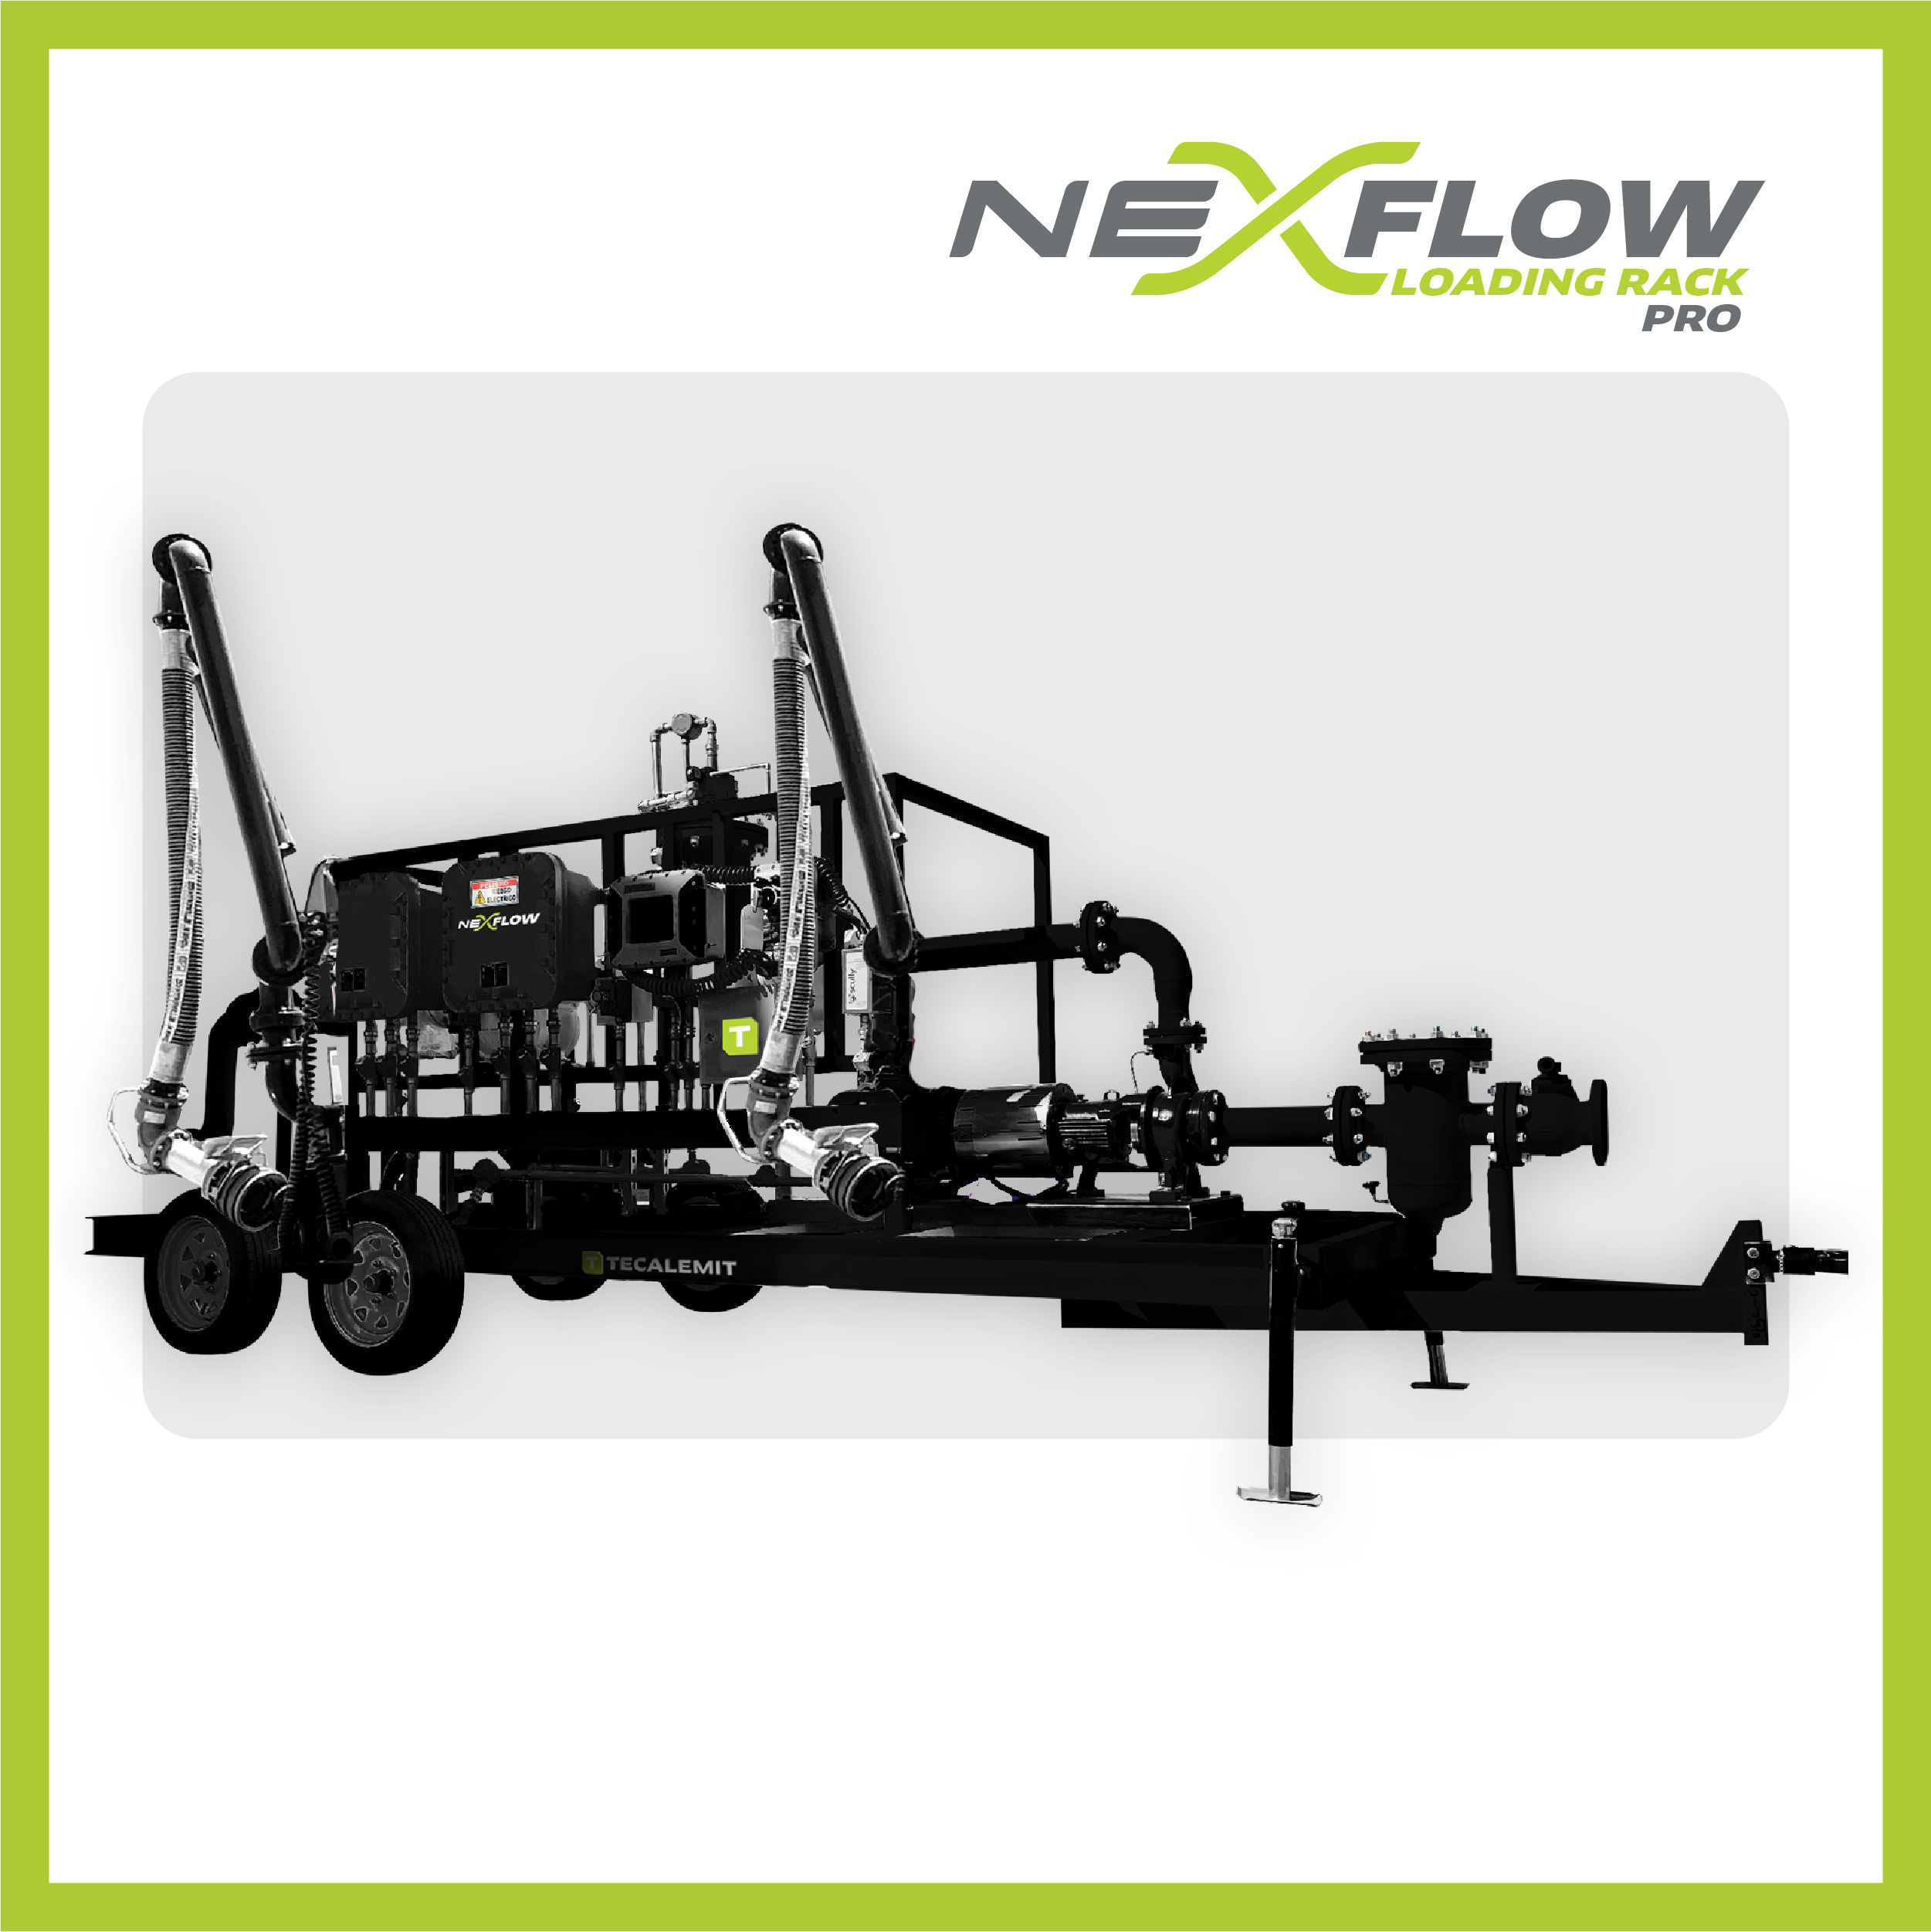 Image of Tecalemit's NexFlow Loading Rack Pro, a premium fluid transfer system with dual-arm functionality, designed for enhanced efficiency in truck and railcar loading and unloading. Features a robust, industrial design, suitable for multi-spot loading areas.